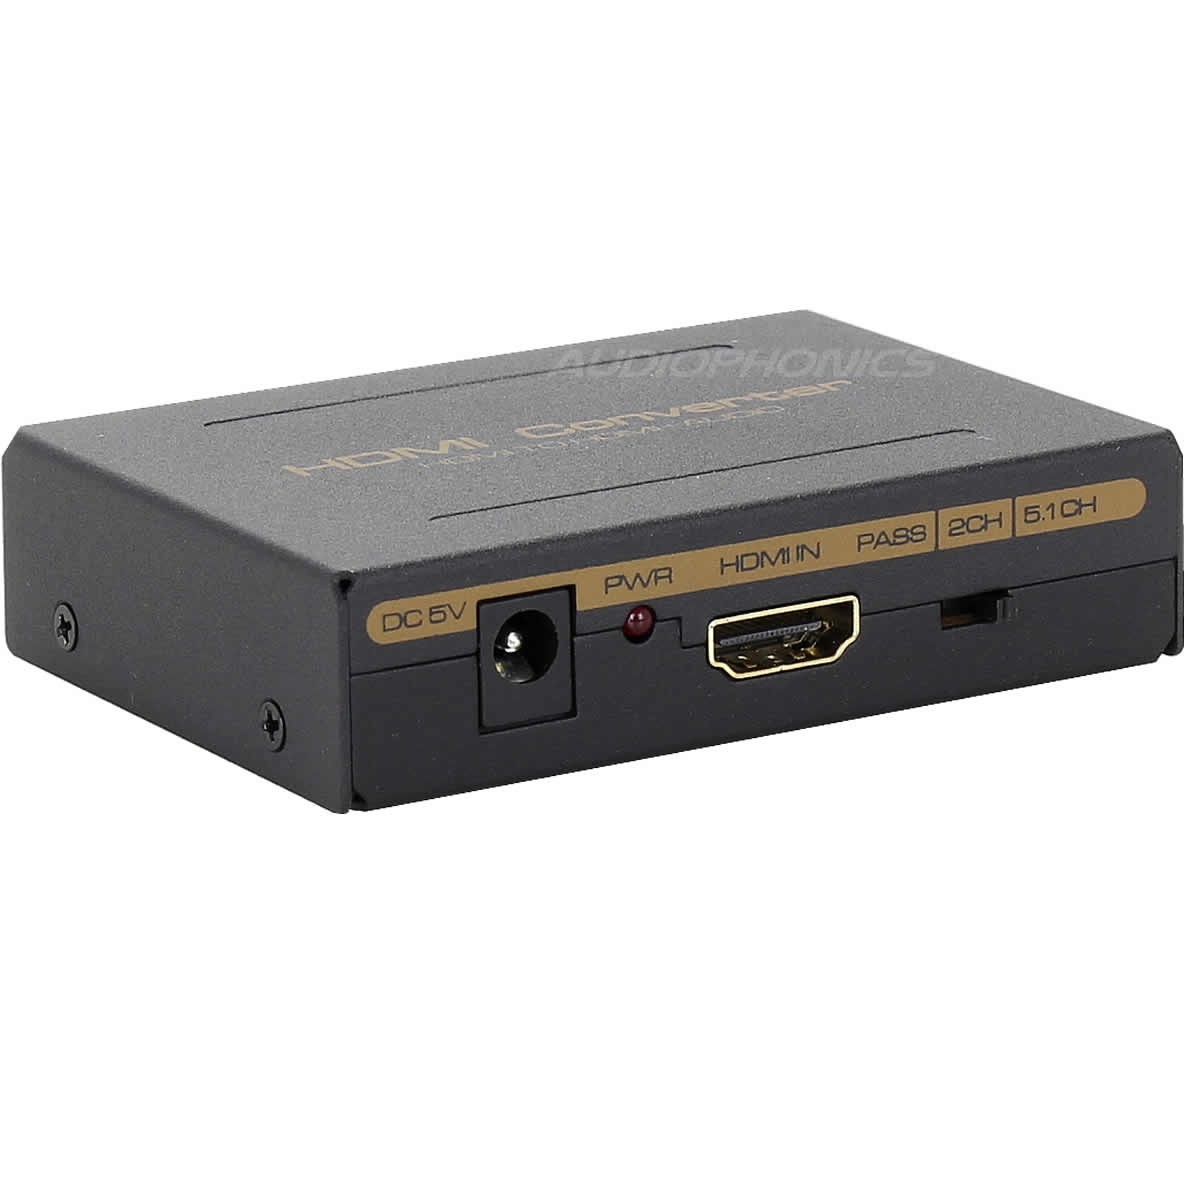 HDMI 5.1 to HDMI and Audio optical / RCA stereo Converter